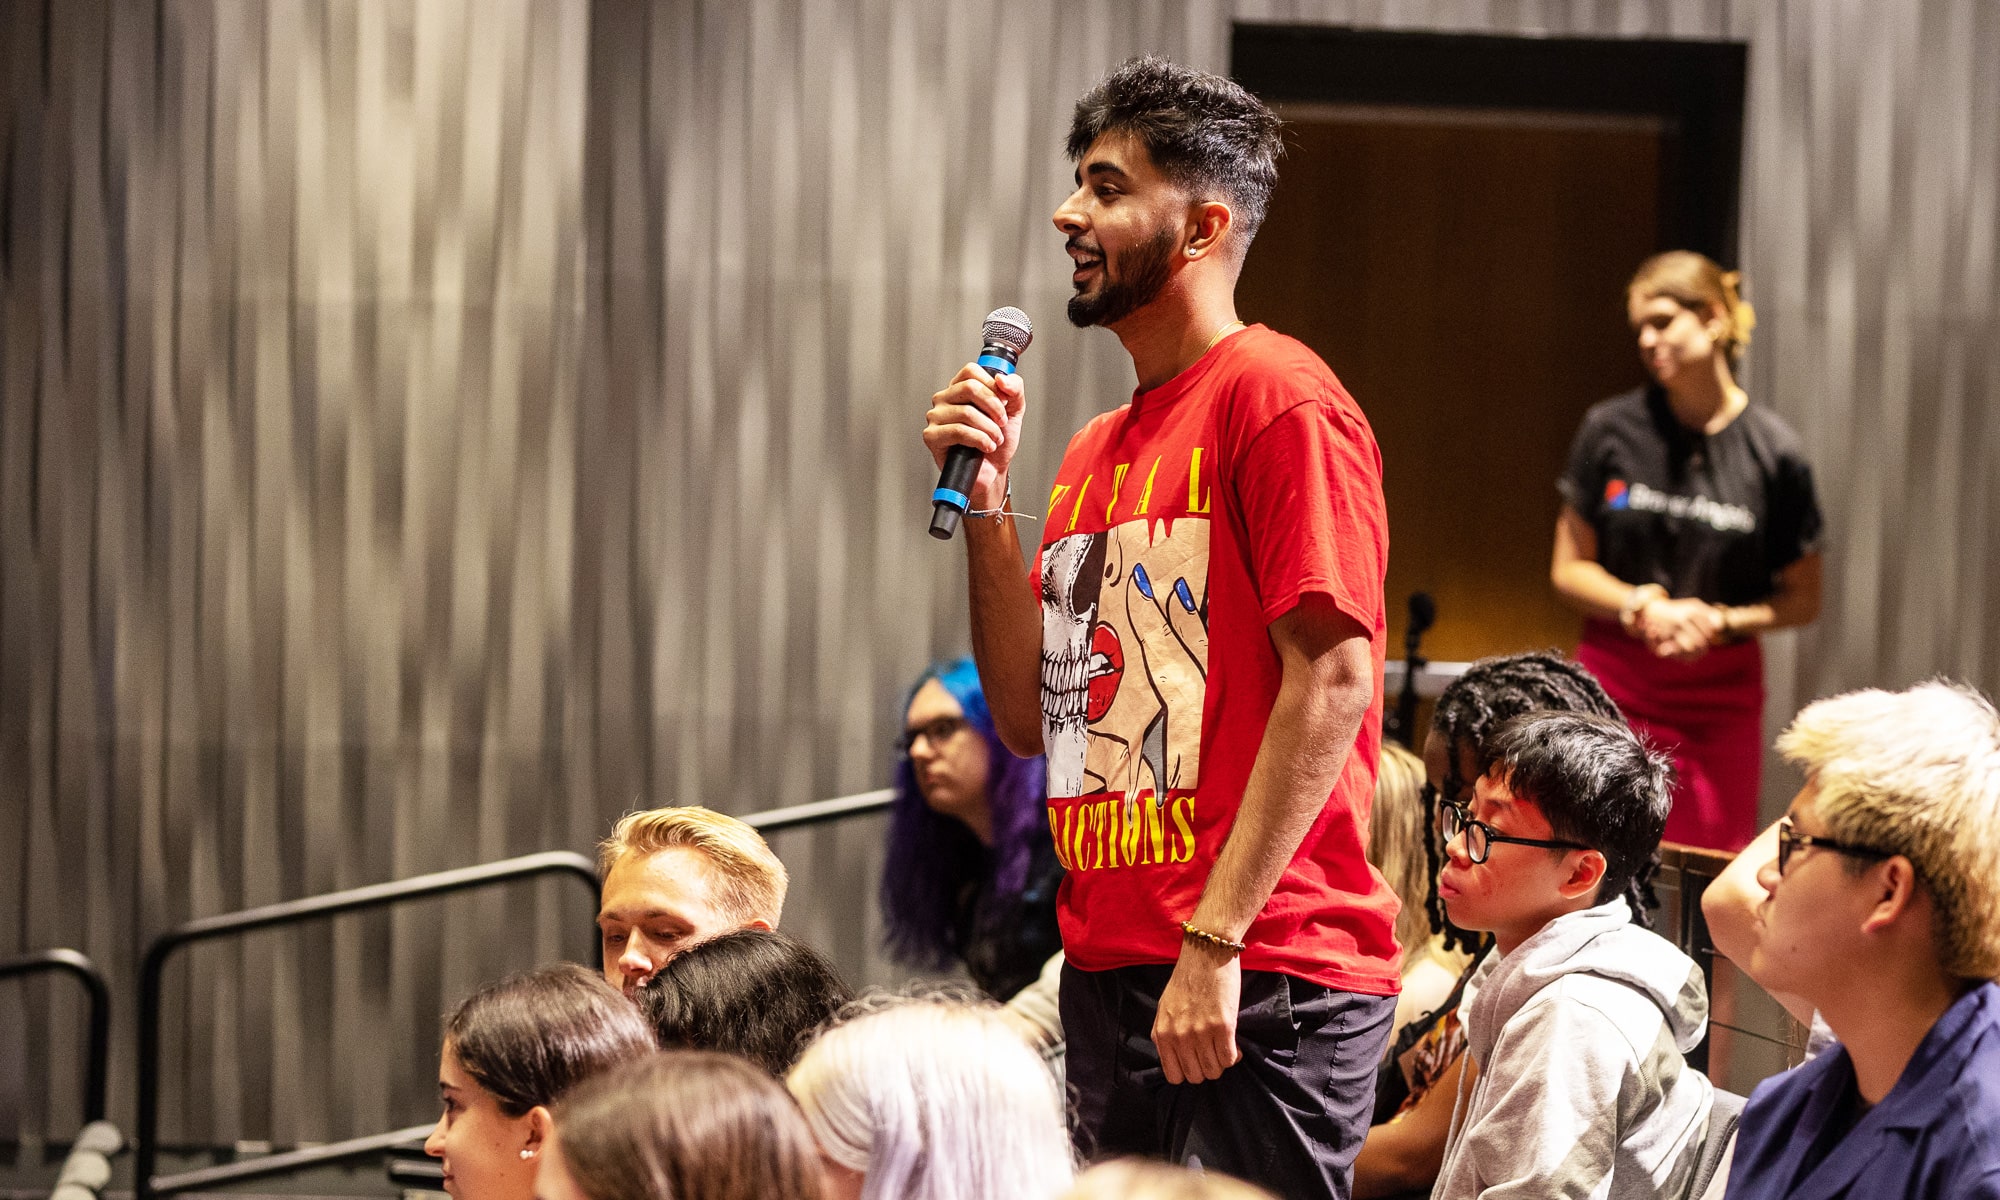 First-year students were encouraged to voice their opinions in a debate that focused on whether campus free speech should be limited.